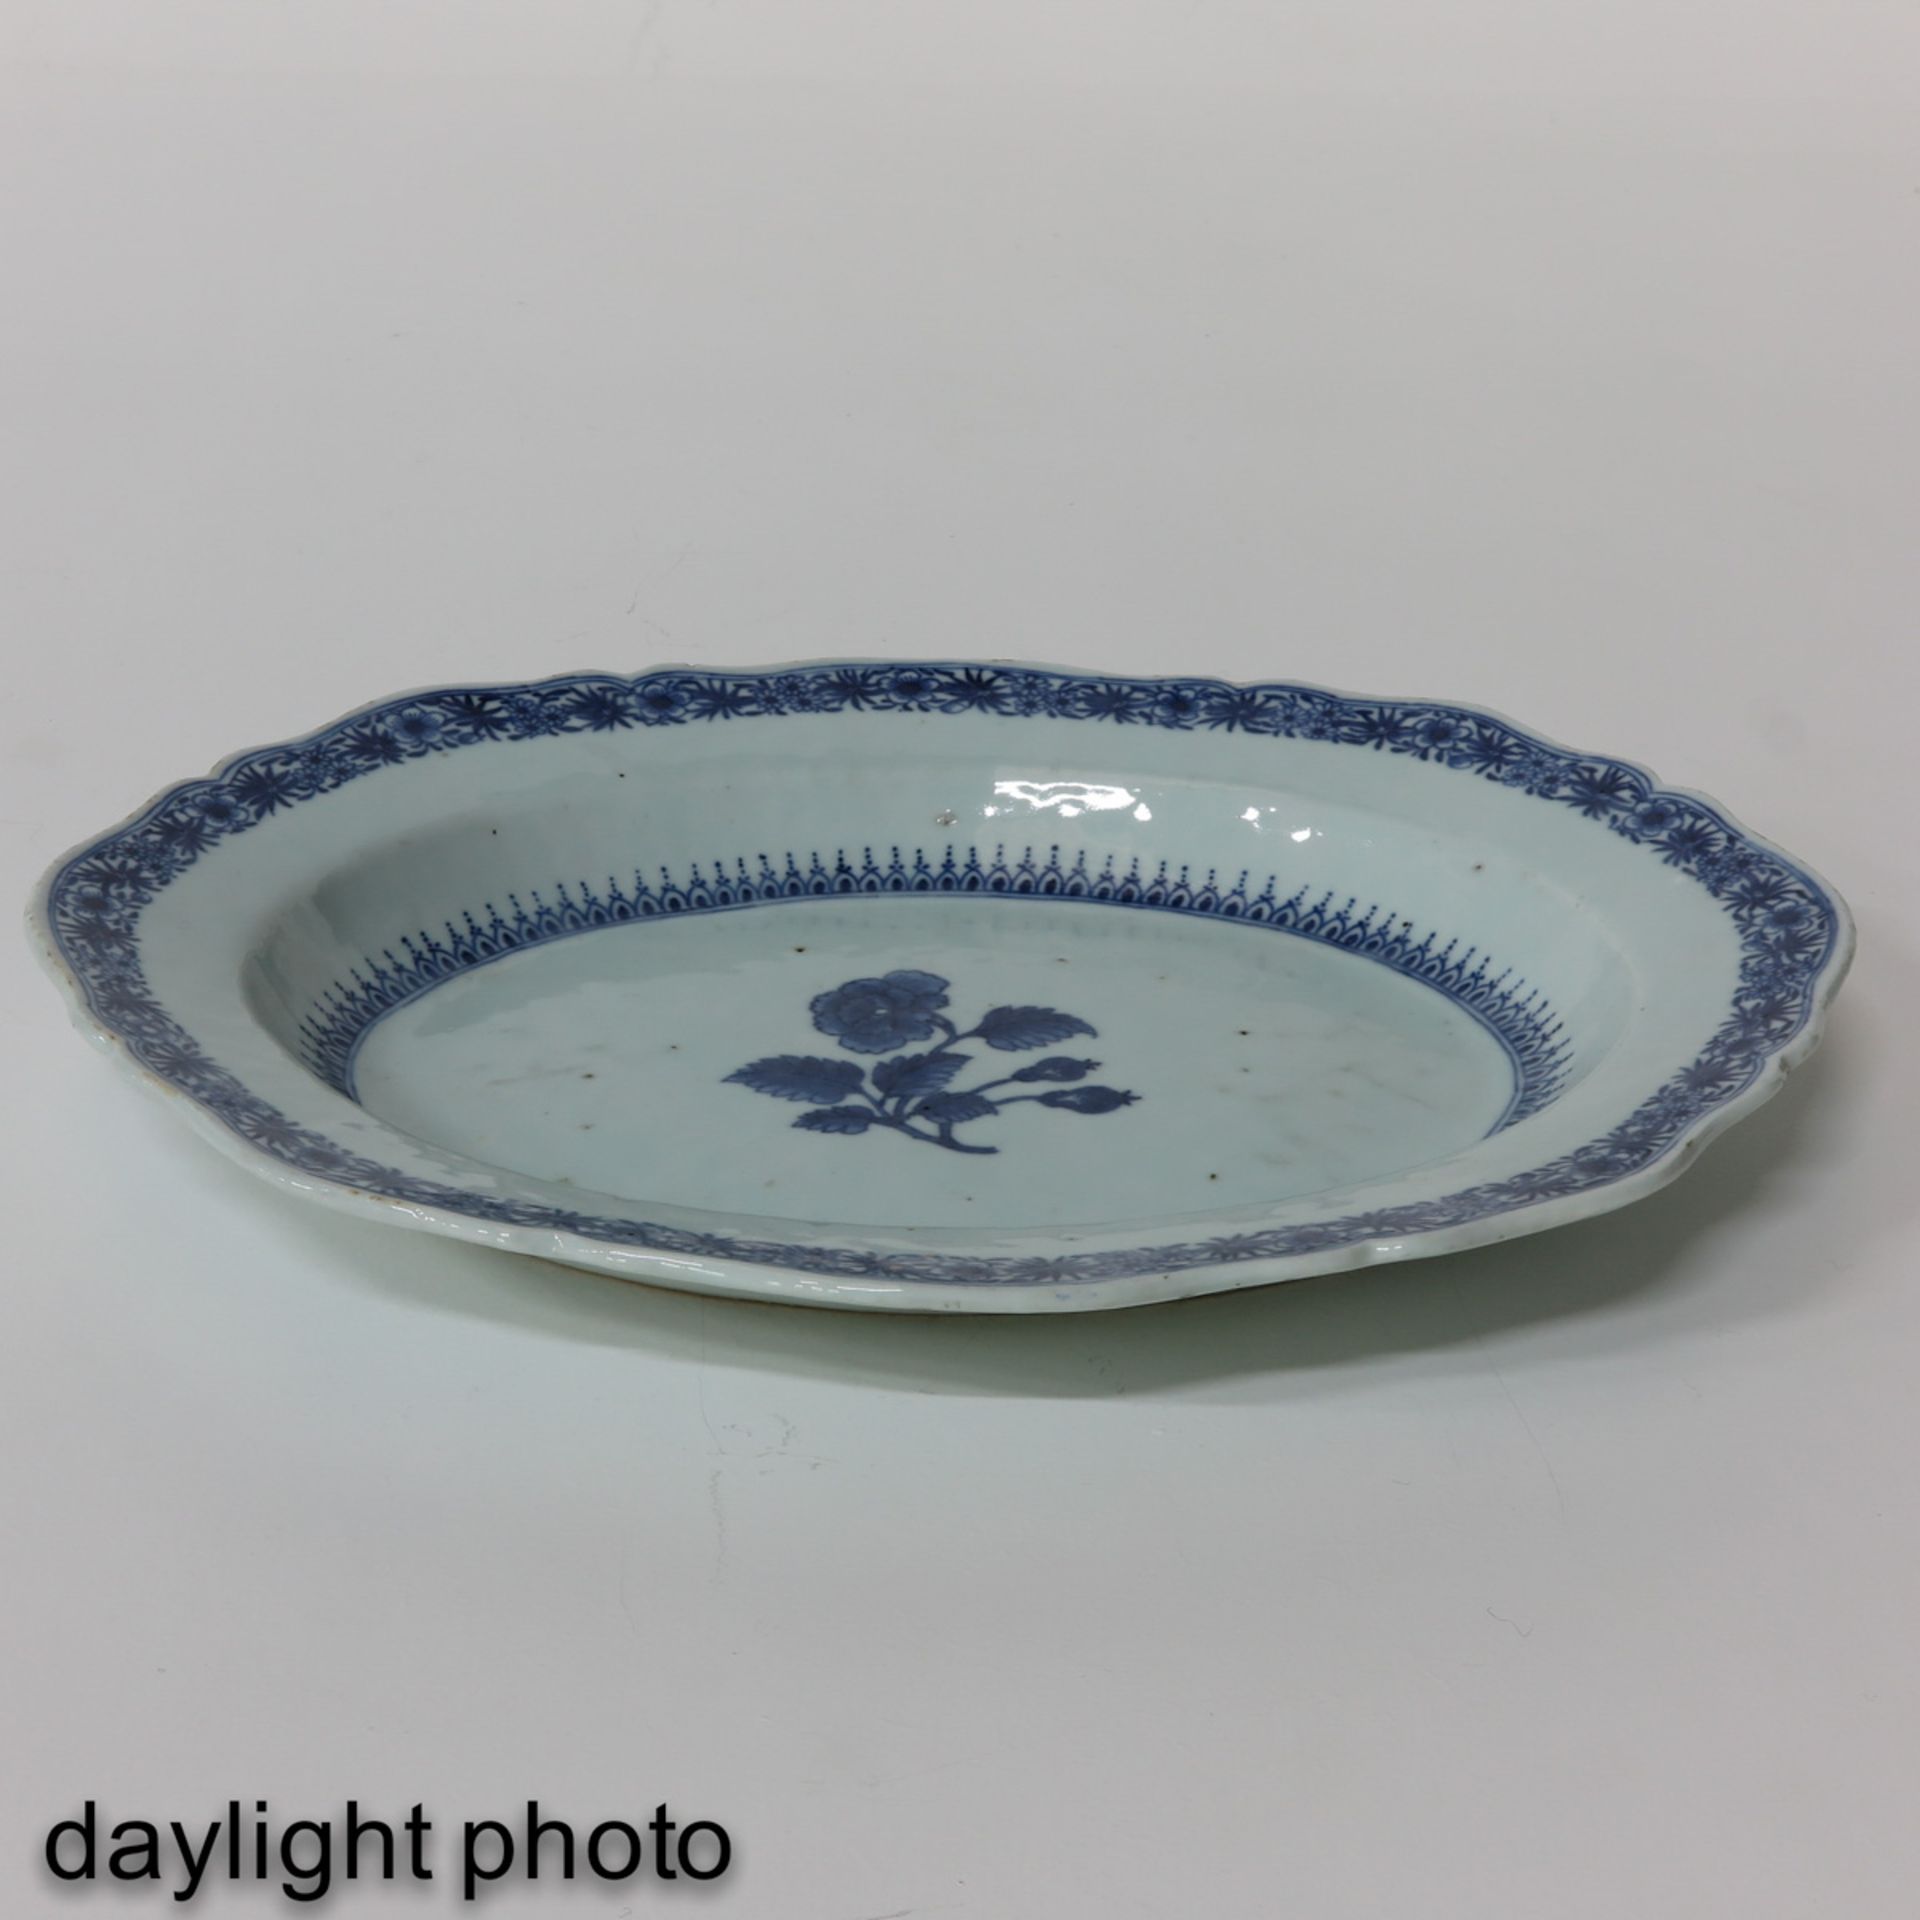 A Blue and White Serving Dish - Image 5 of 7